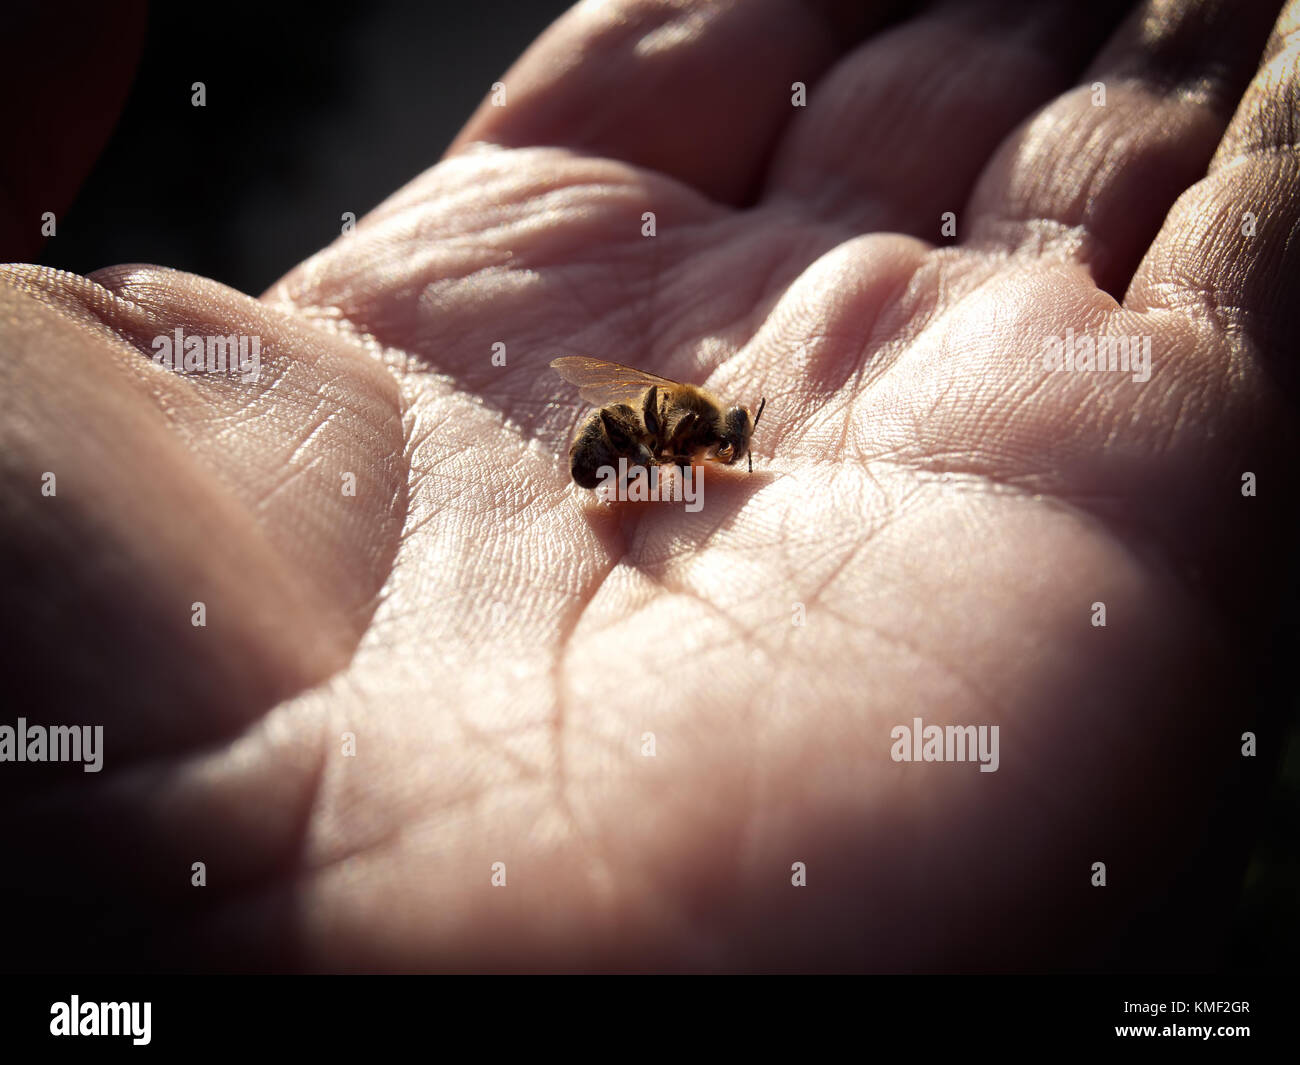 Hand is holding a dead bee as a concept of the problem of dying bees around the world. Stock Photo